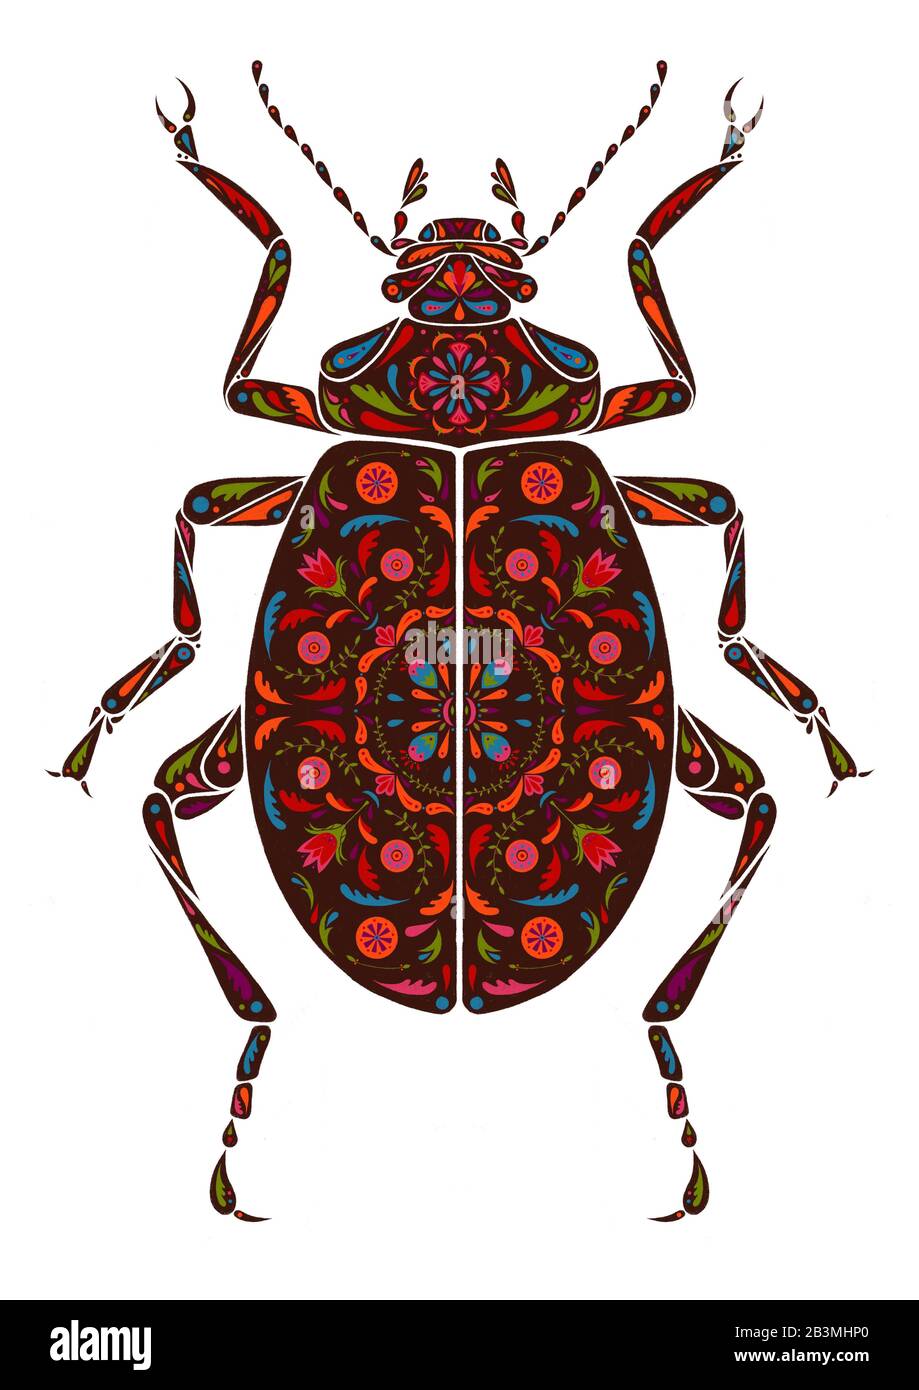 An illustration, a graphic with the dark brown, chocolate beetle isolated on a white background. Ornamental, ornately decorated beetle. Stock Photo